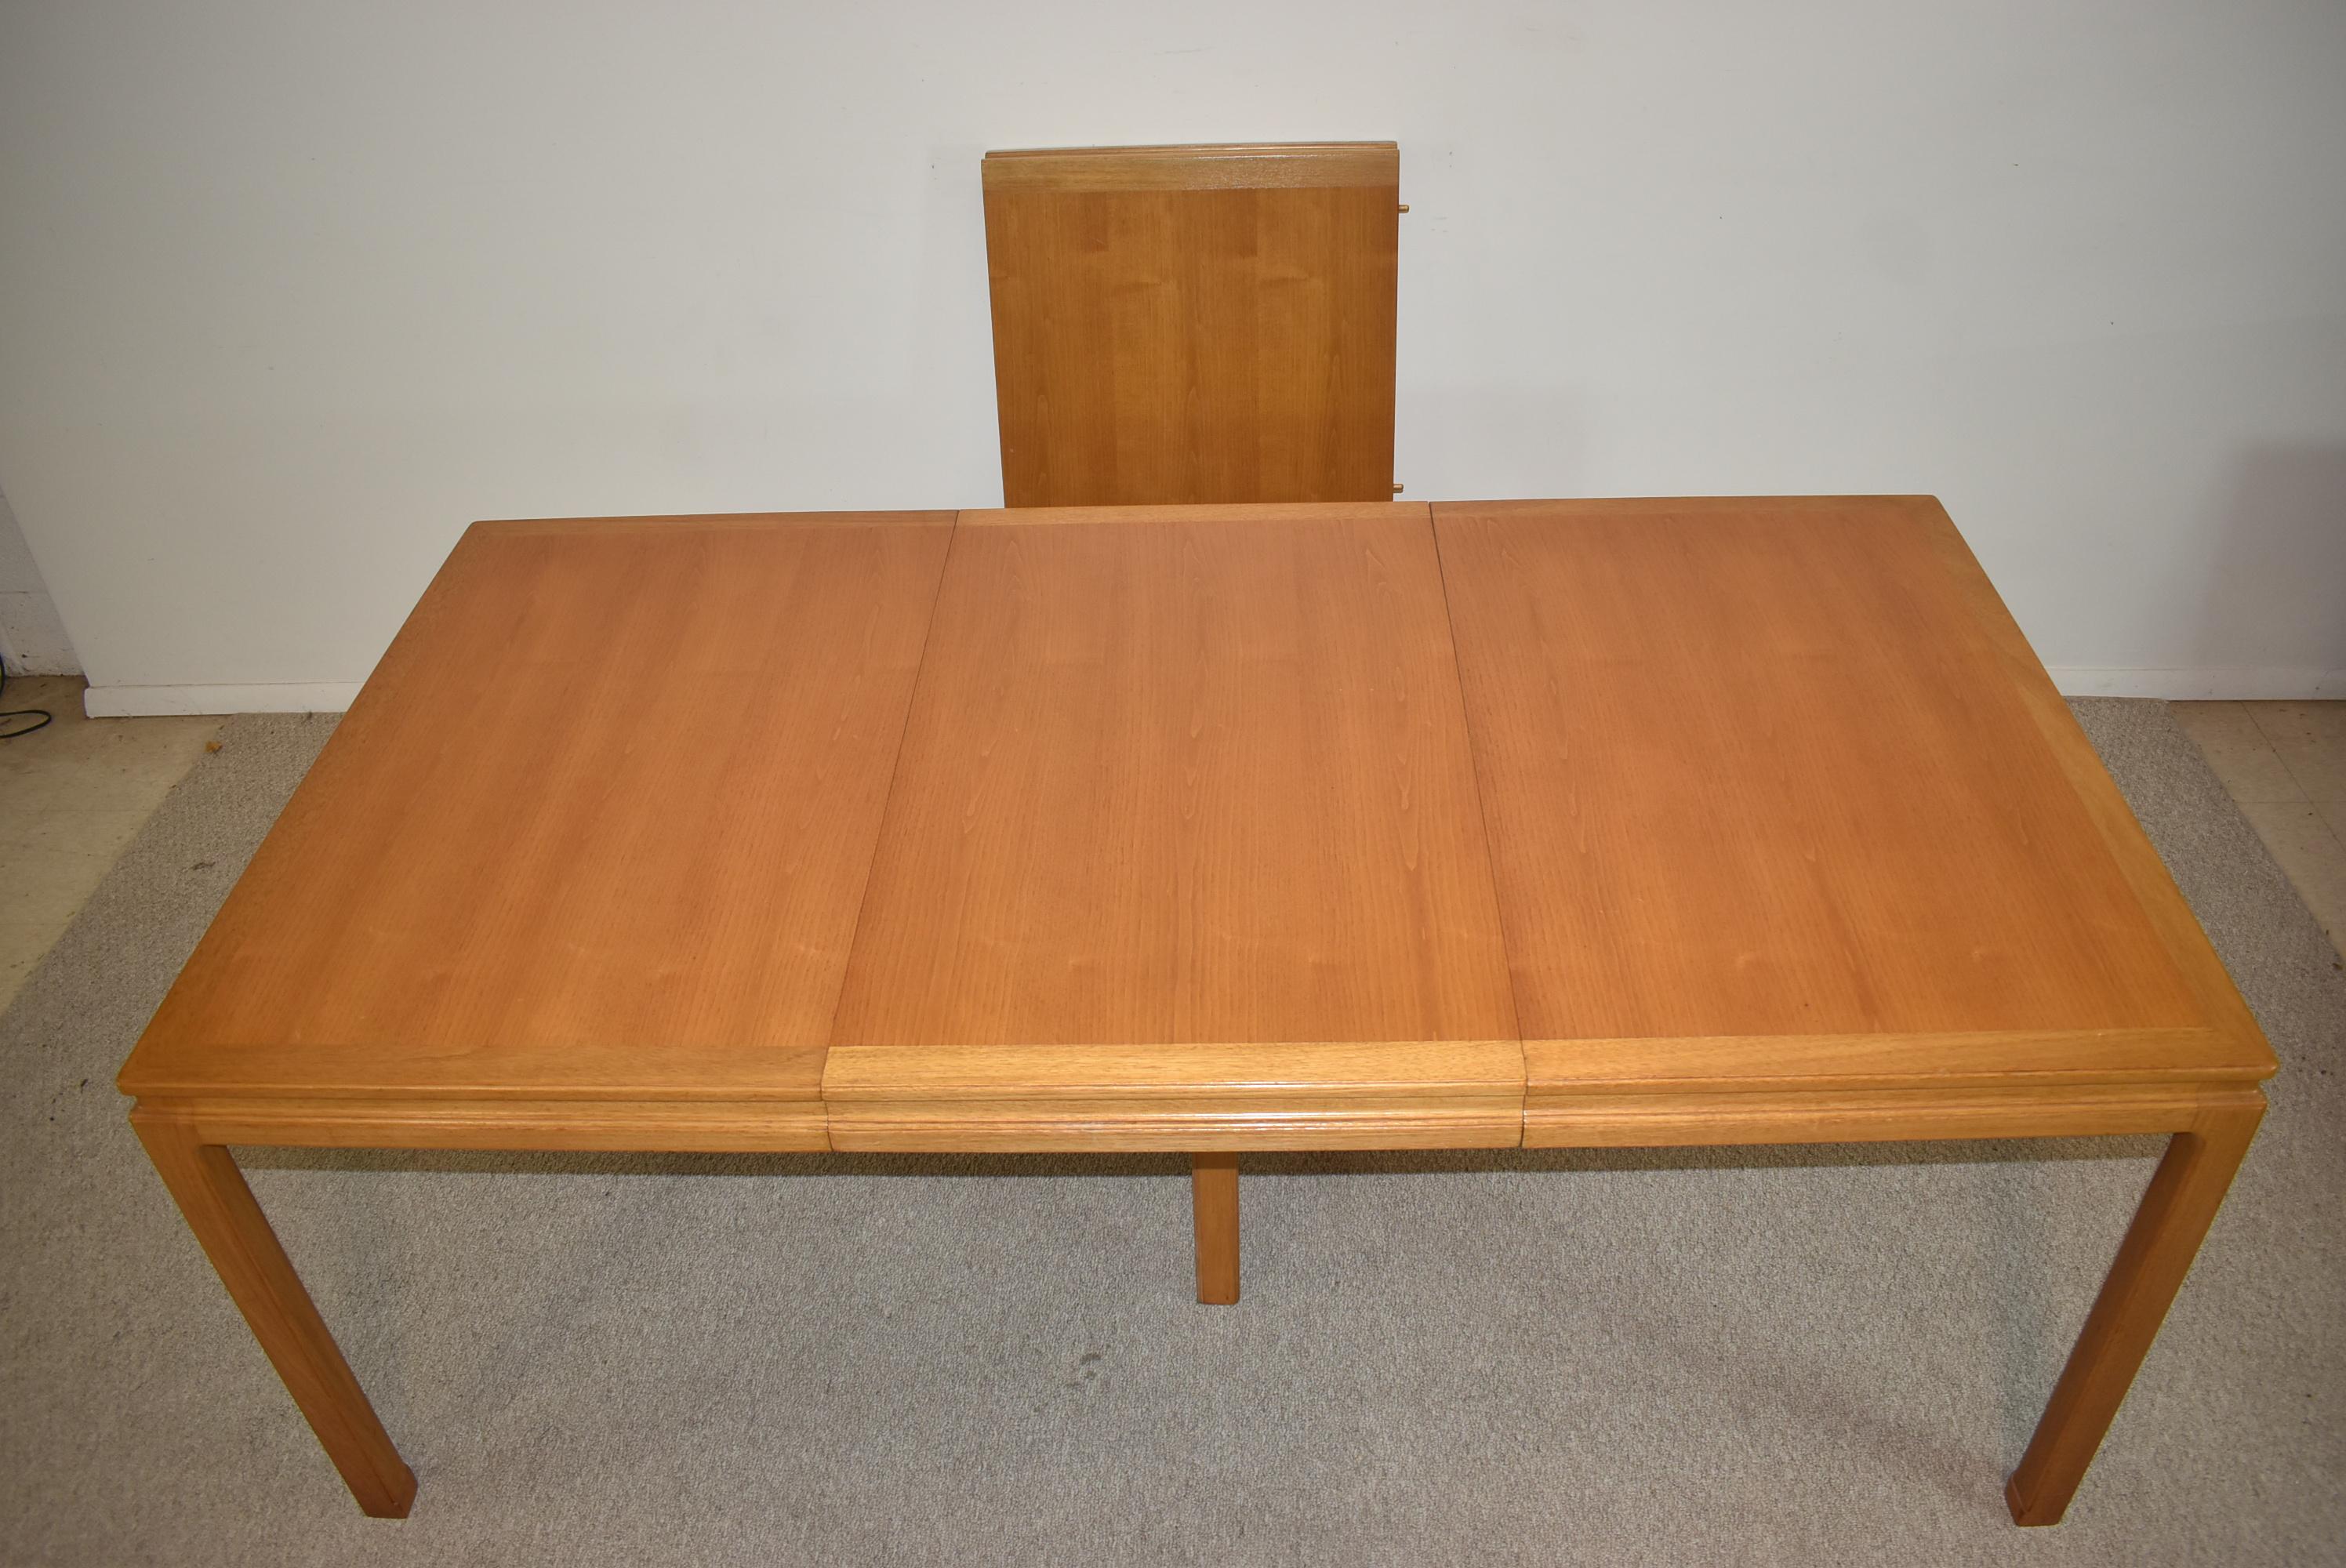 20th Century Mahogany Dining Table with Two Leaves by Edward Wormley for Dunbar For Sale